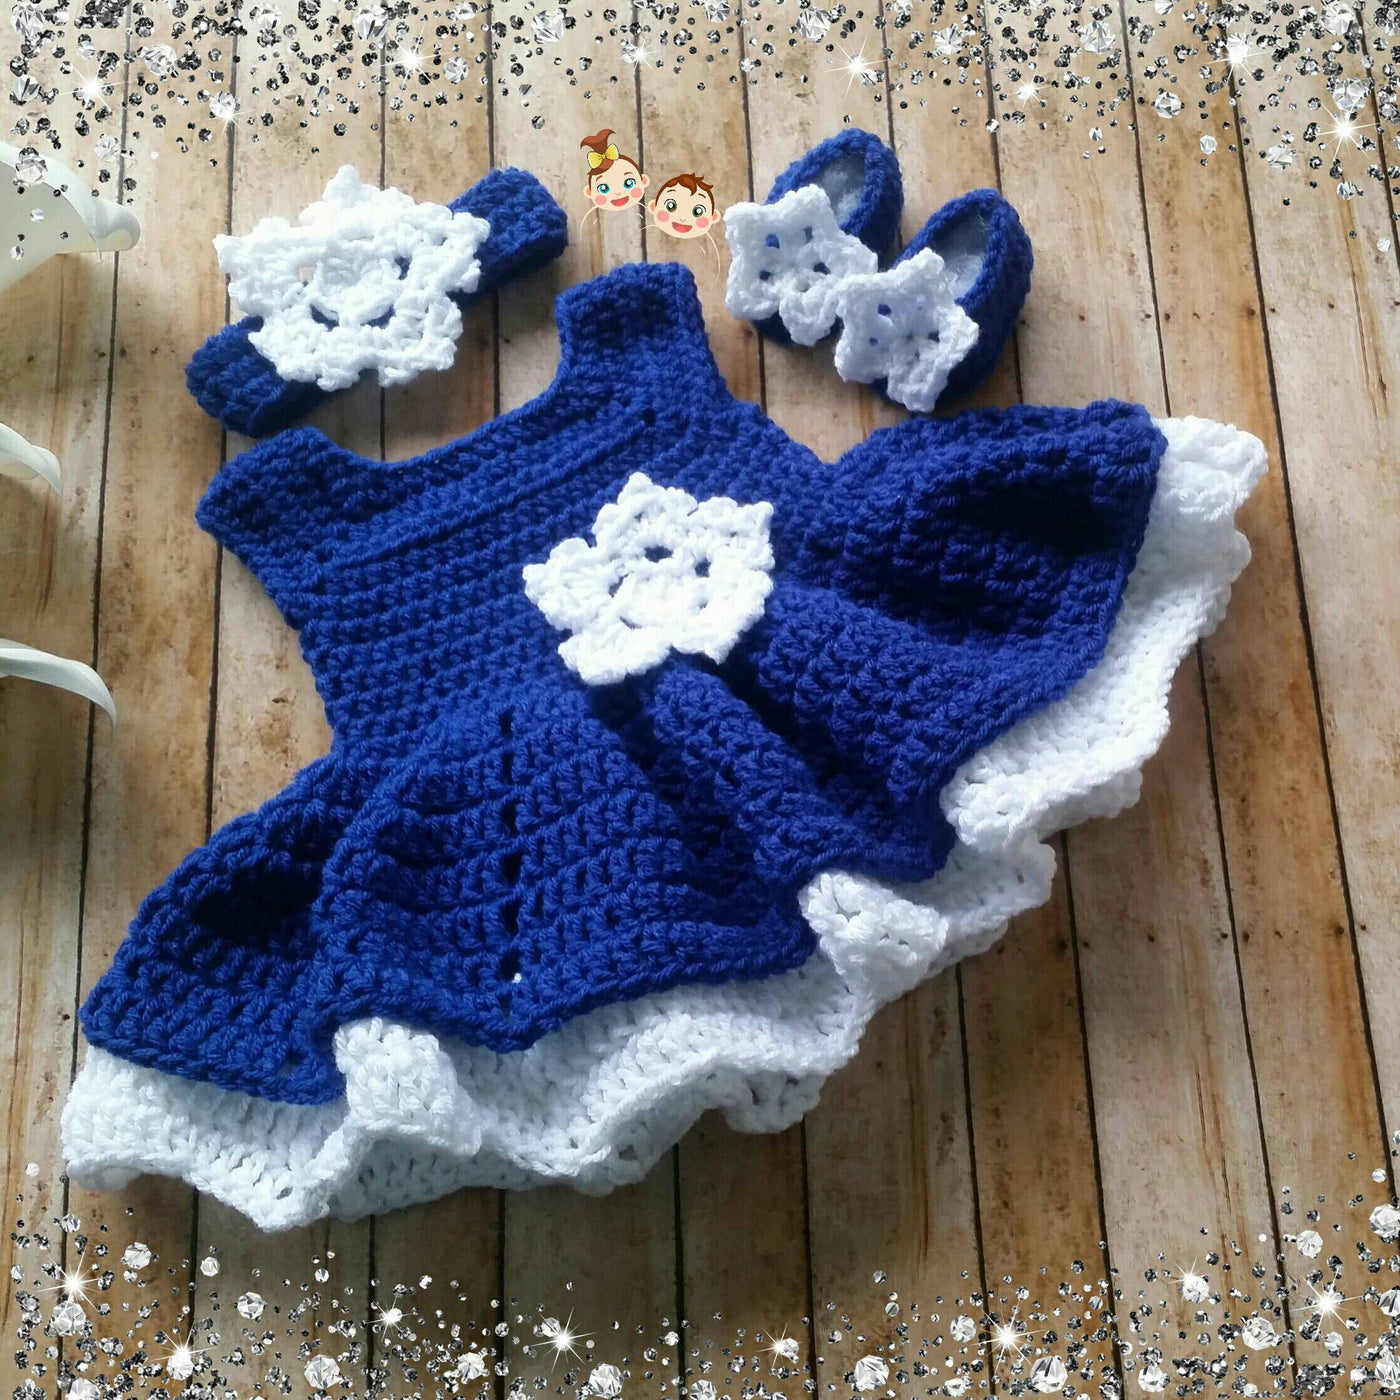 Crochet Baby Dress, Take Home Baby Outfit, Coming Home Dress, Infant Outfits Hanukkah Baby Dress